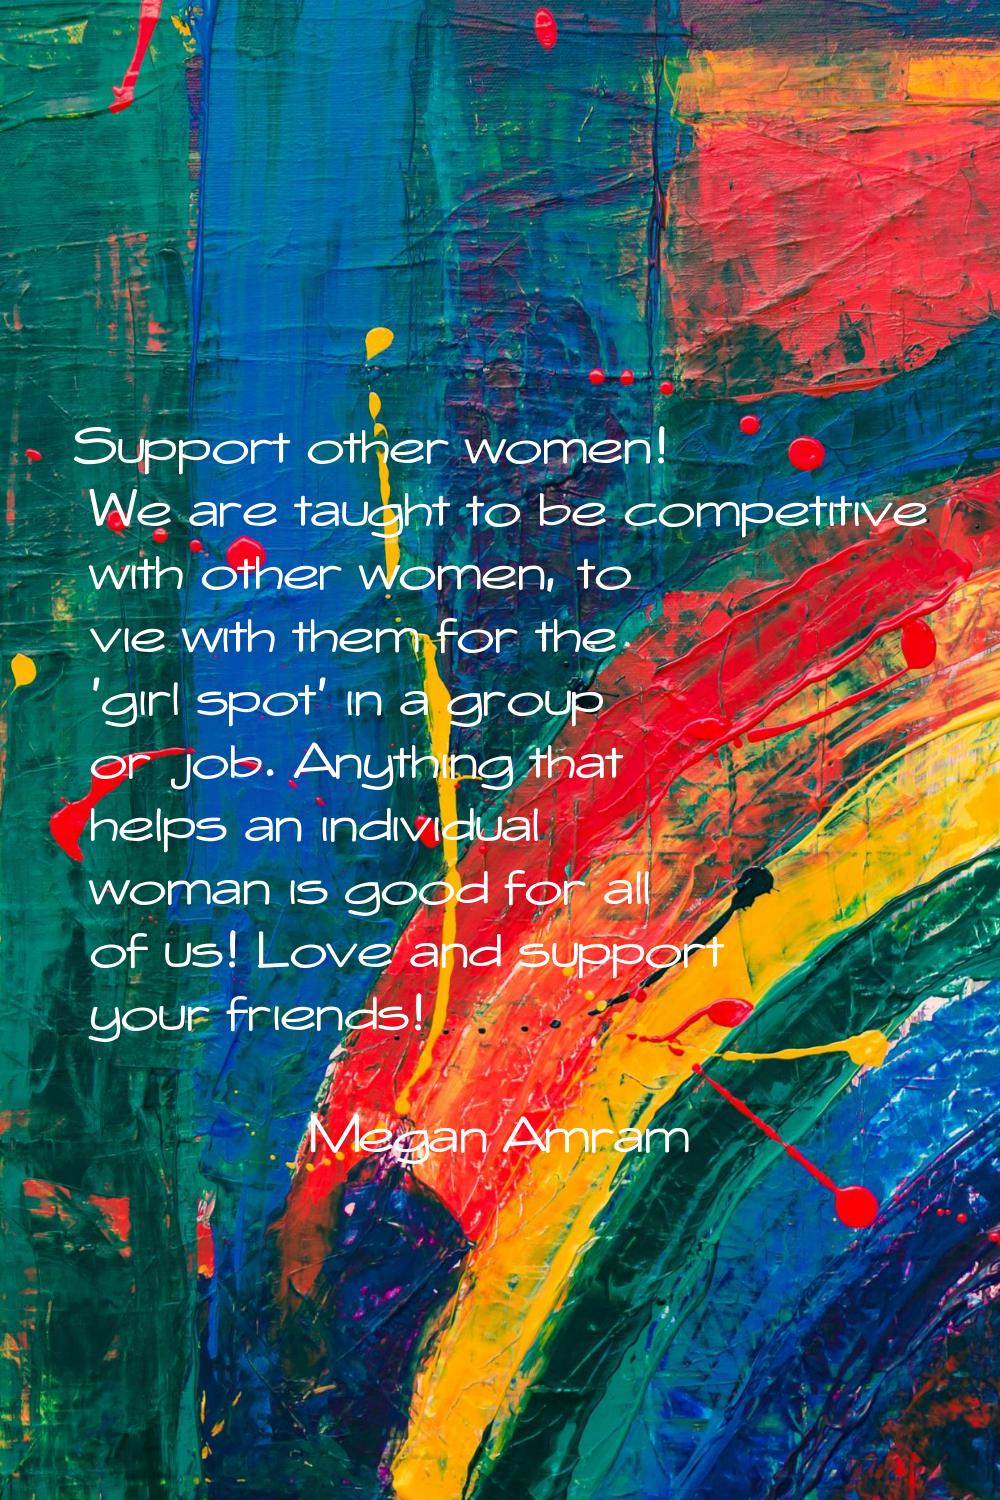 Support other women! We are taught to be competitive with other women, to vie with them for the 'gi